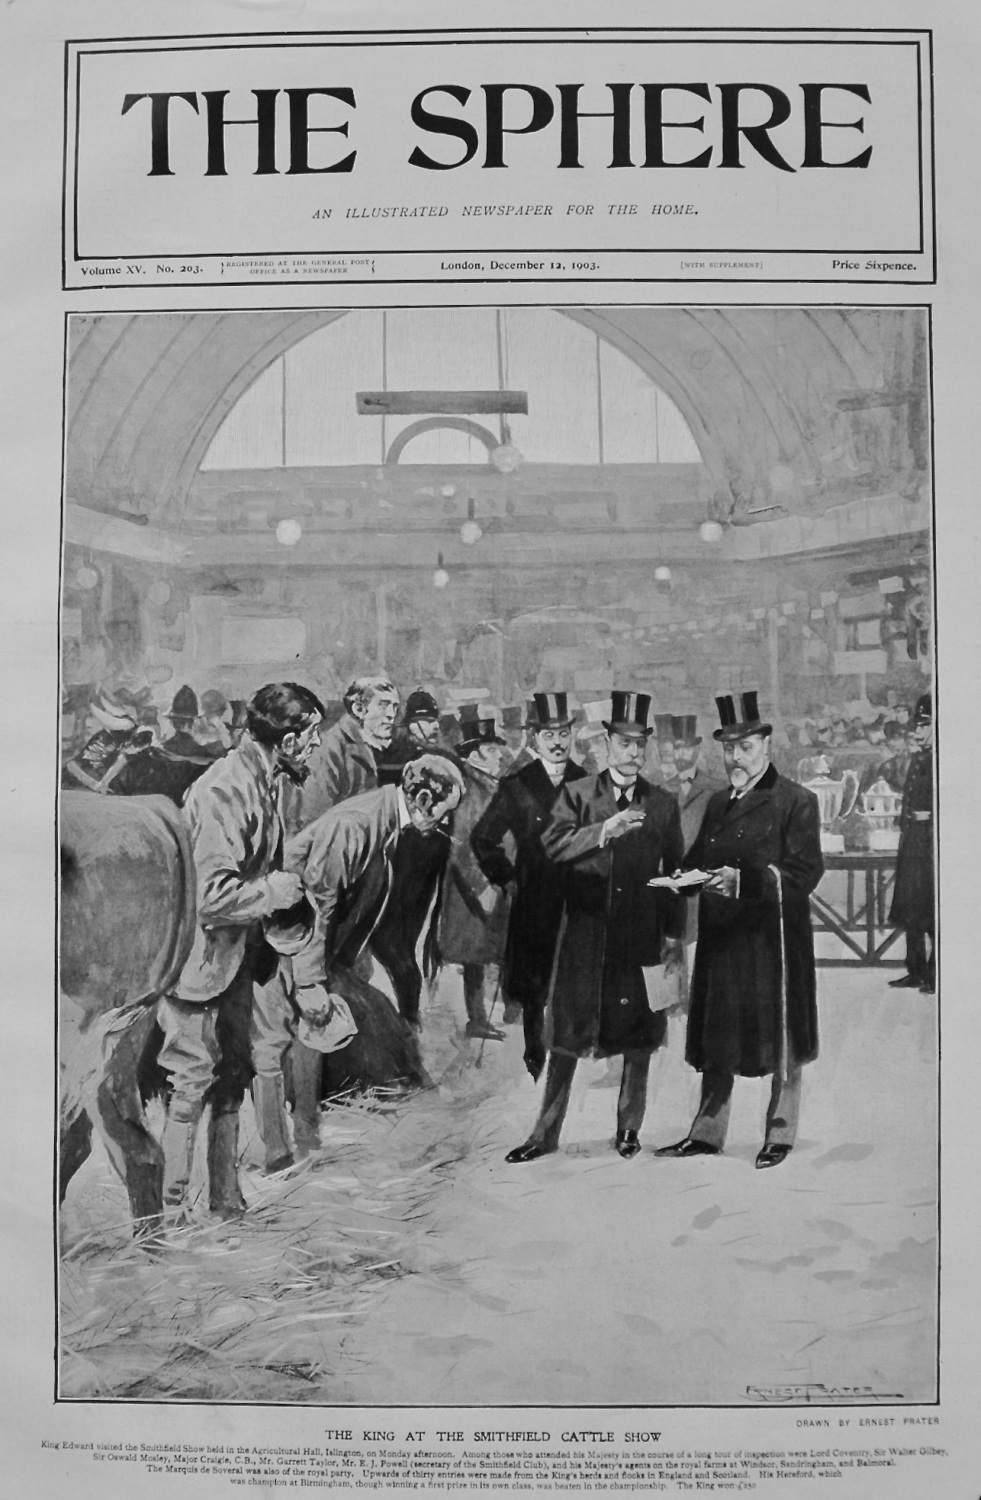 The King at the Smithfield Show. 1903